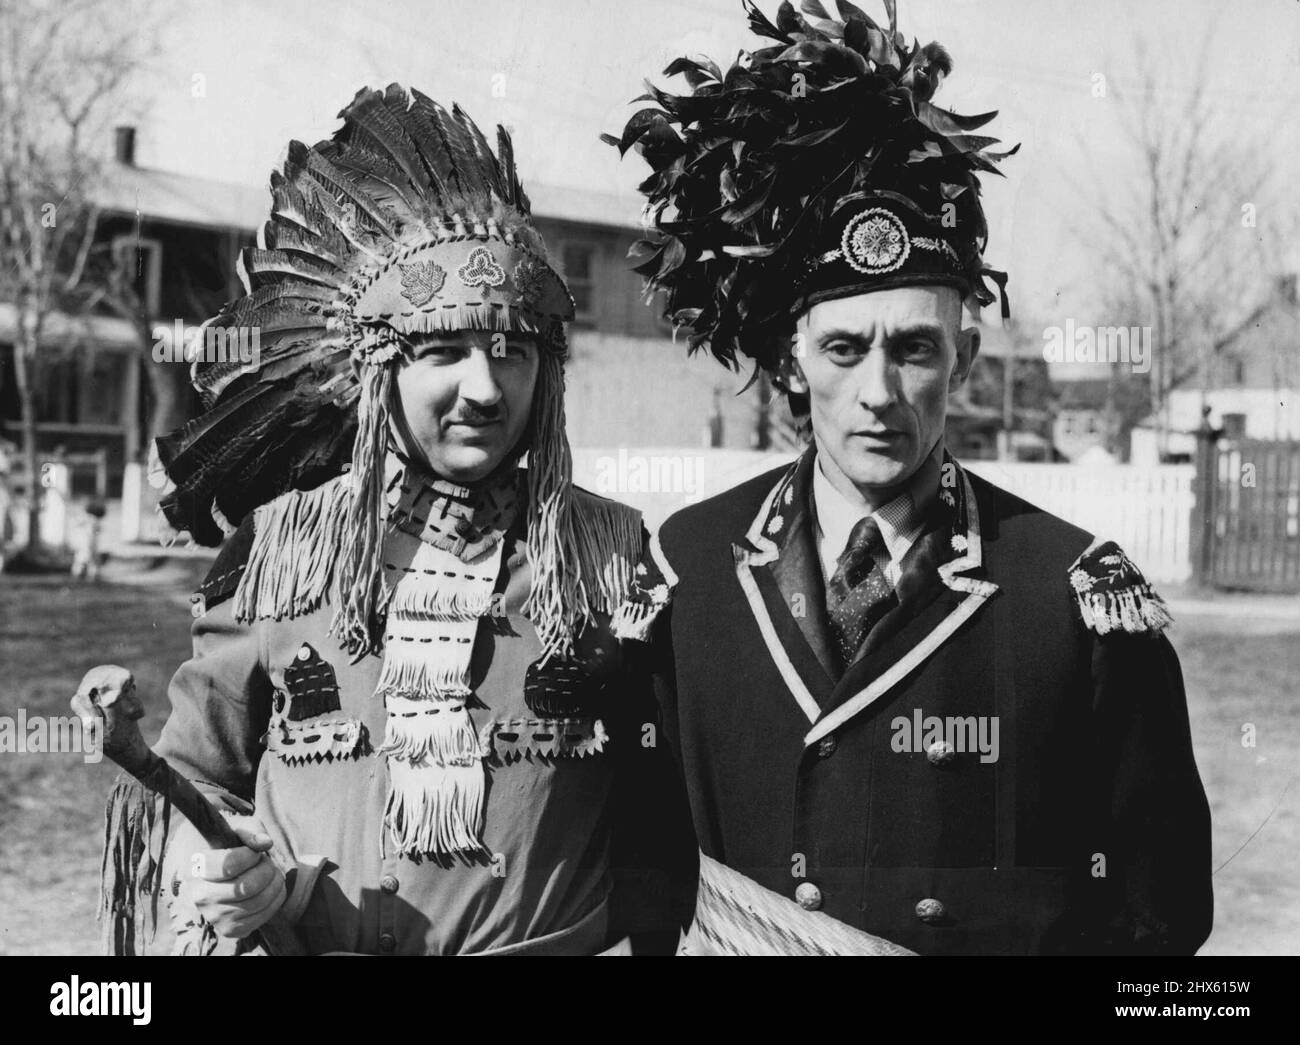 Huron Indians To Greet king And Queen -- These pictures, of the Huron Indians, the oldest tribe in North America, were made at their reservation near here, as they spruced up their ceremonial bonnets in preparation for their ceremony to greet King George and Queen Elizabeth. This close up of two Indians in war Regalia, shows Jules Sioui, (left), and Arigene Sioui. The warrior on the left is wearing the ancient Huron dress, while the brave on the right is wearing comparatively modern head-dress a Stock Photo